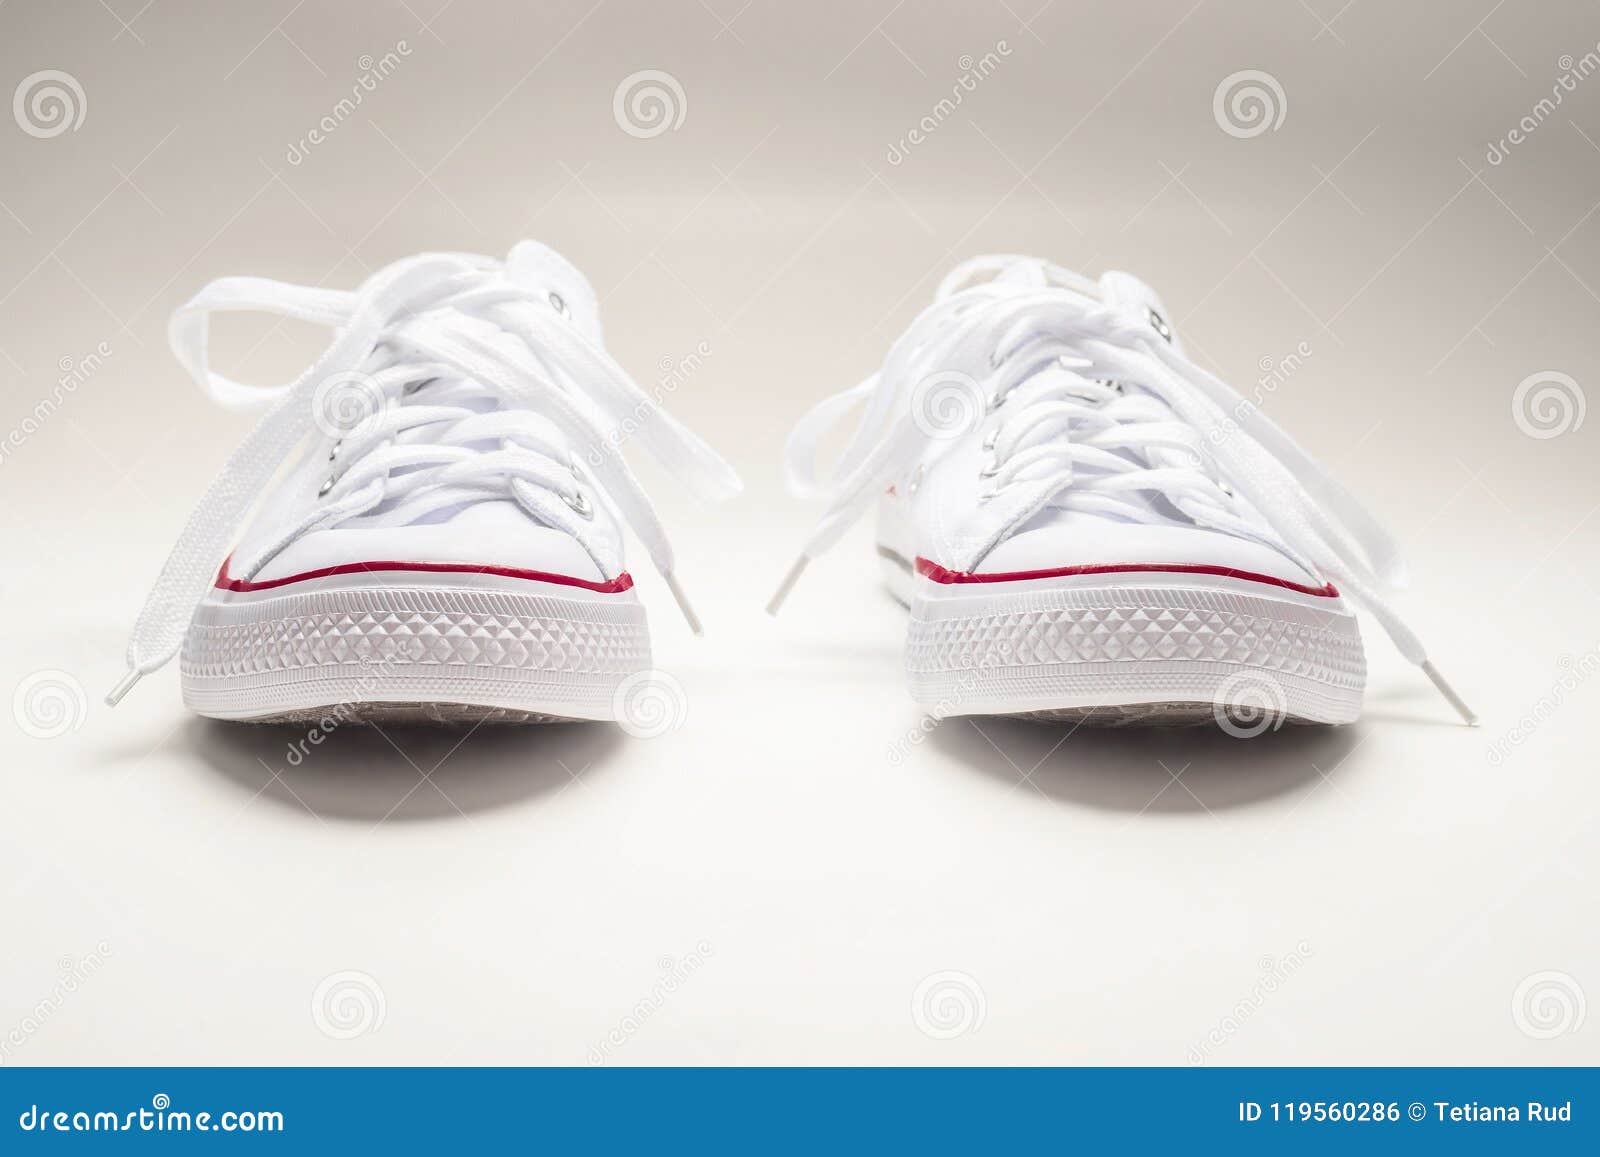 White Sneakers On White Background Stock Photo - Image of ...